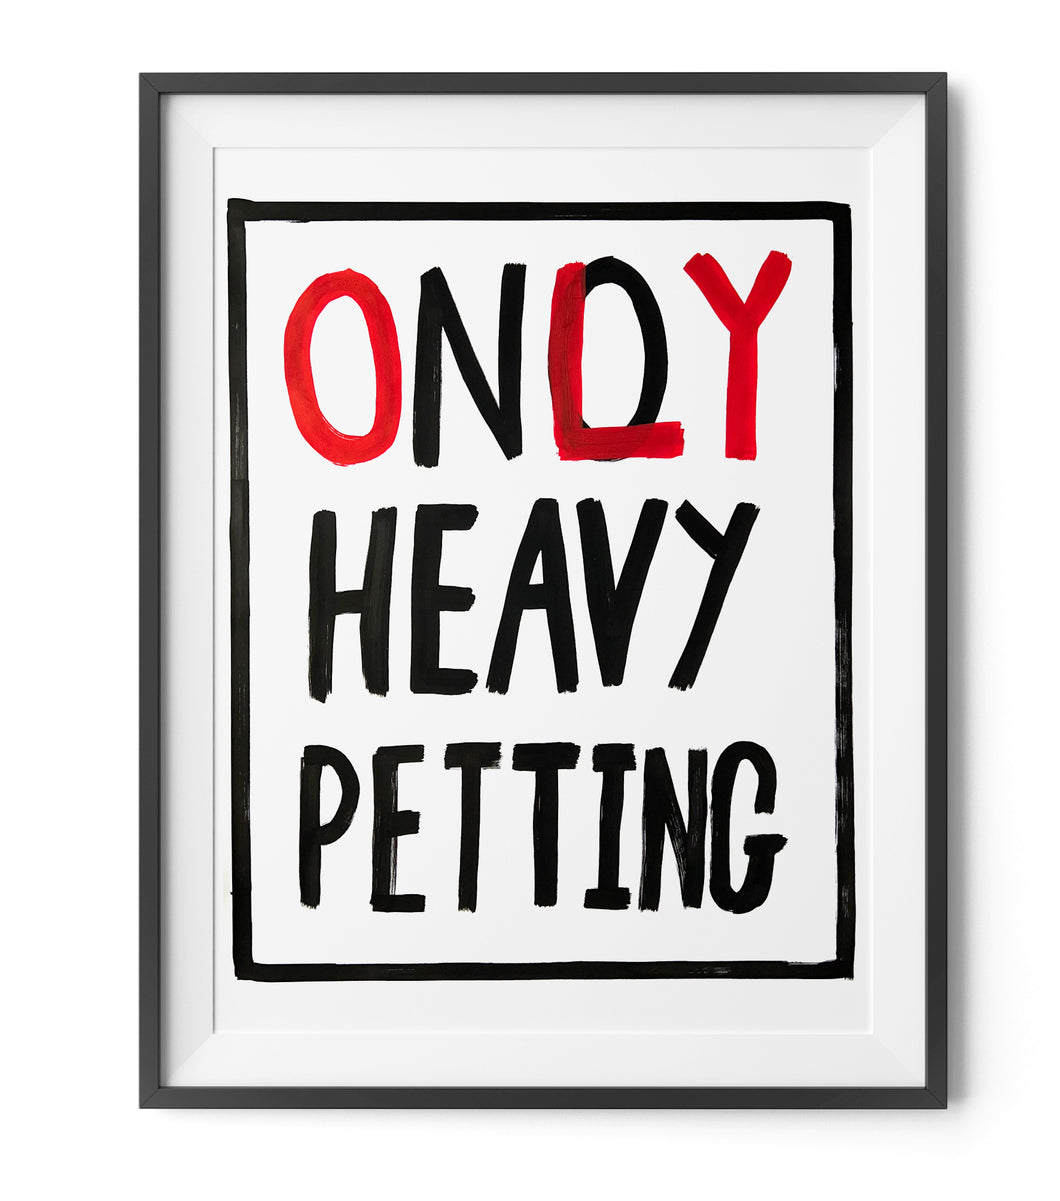 Billy The Kid - HEAVY PETTING - A2 Print - FRAMED